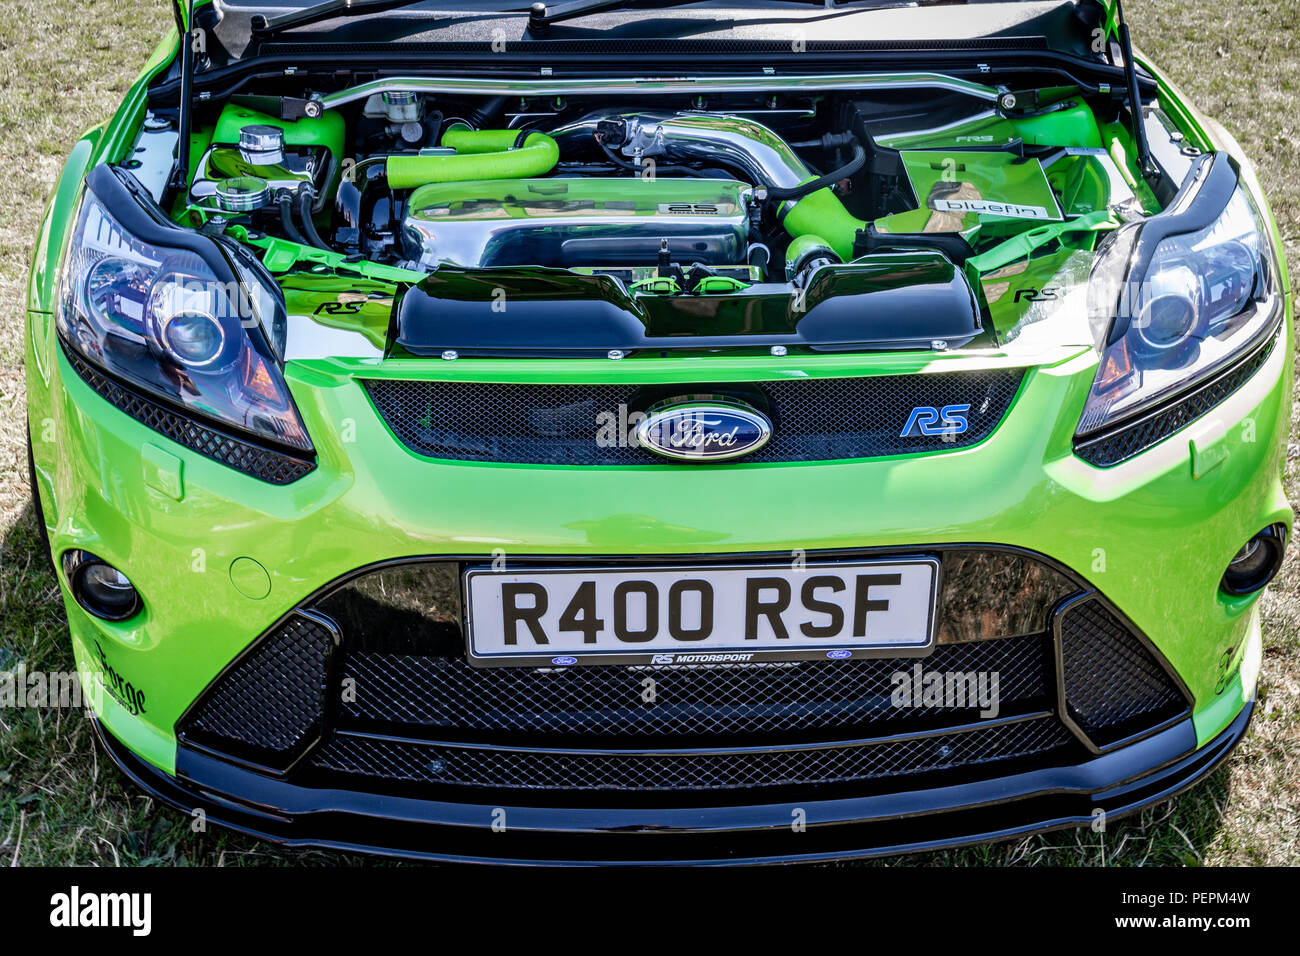 Ford Focus RS 400 Classic Car Show porthcawl 2018 Stockfoto